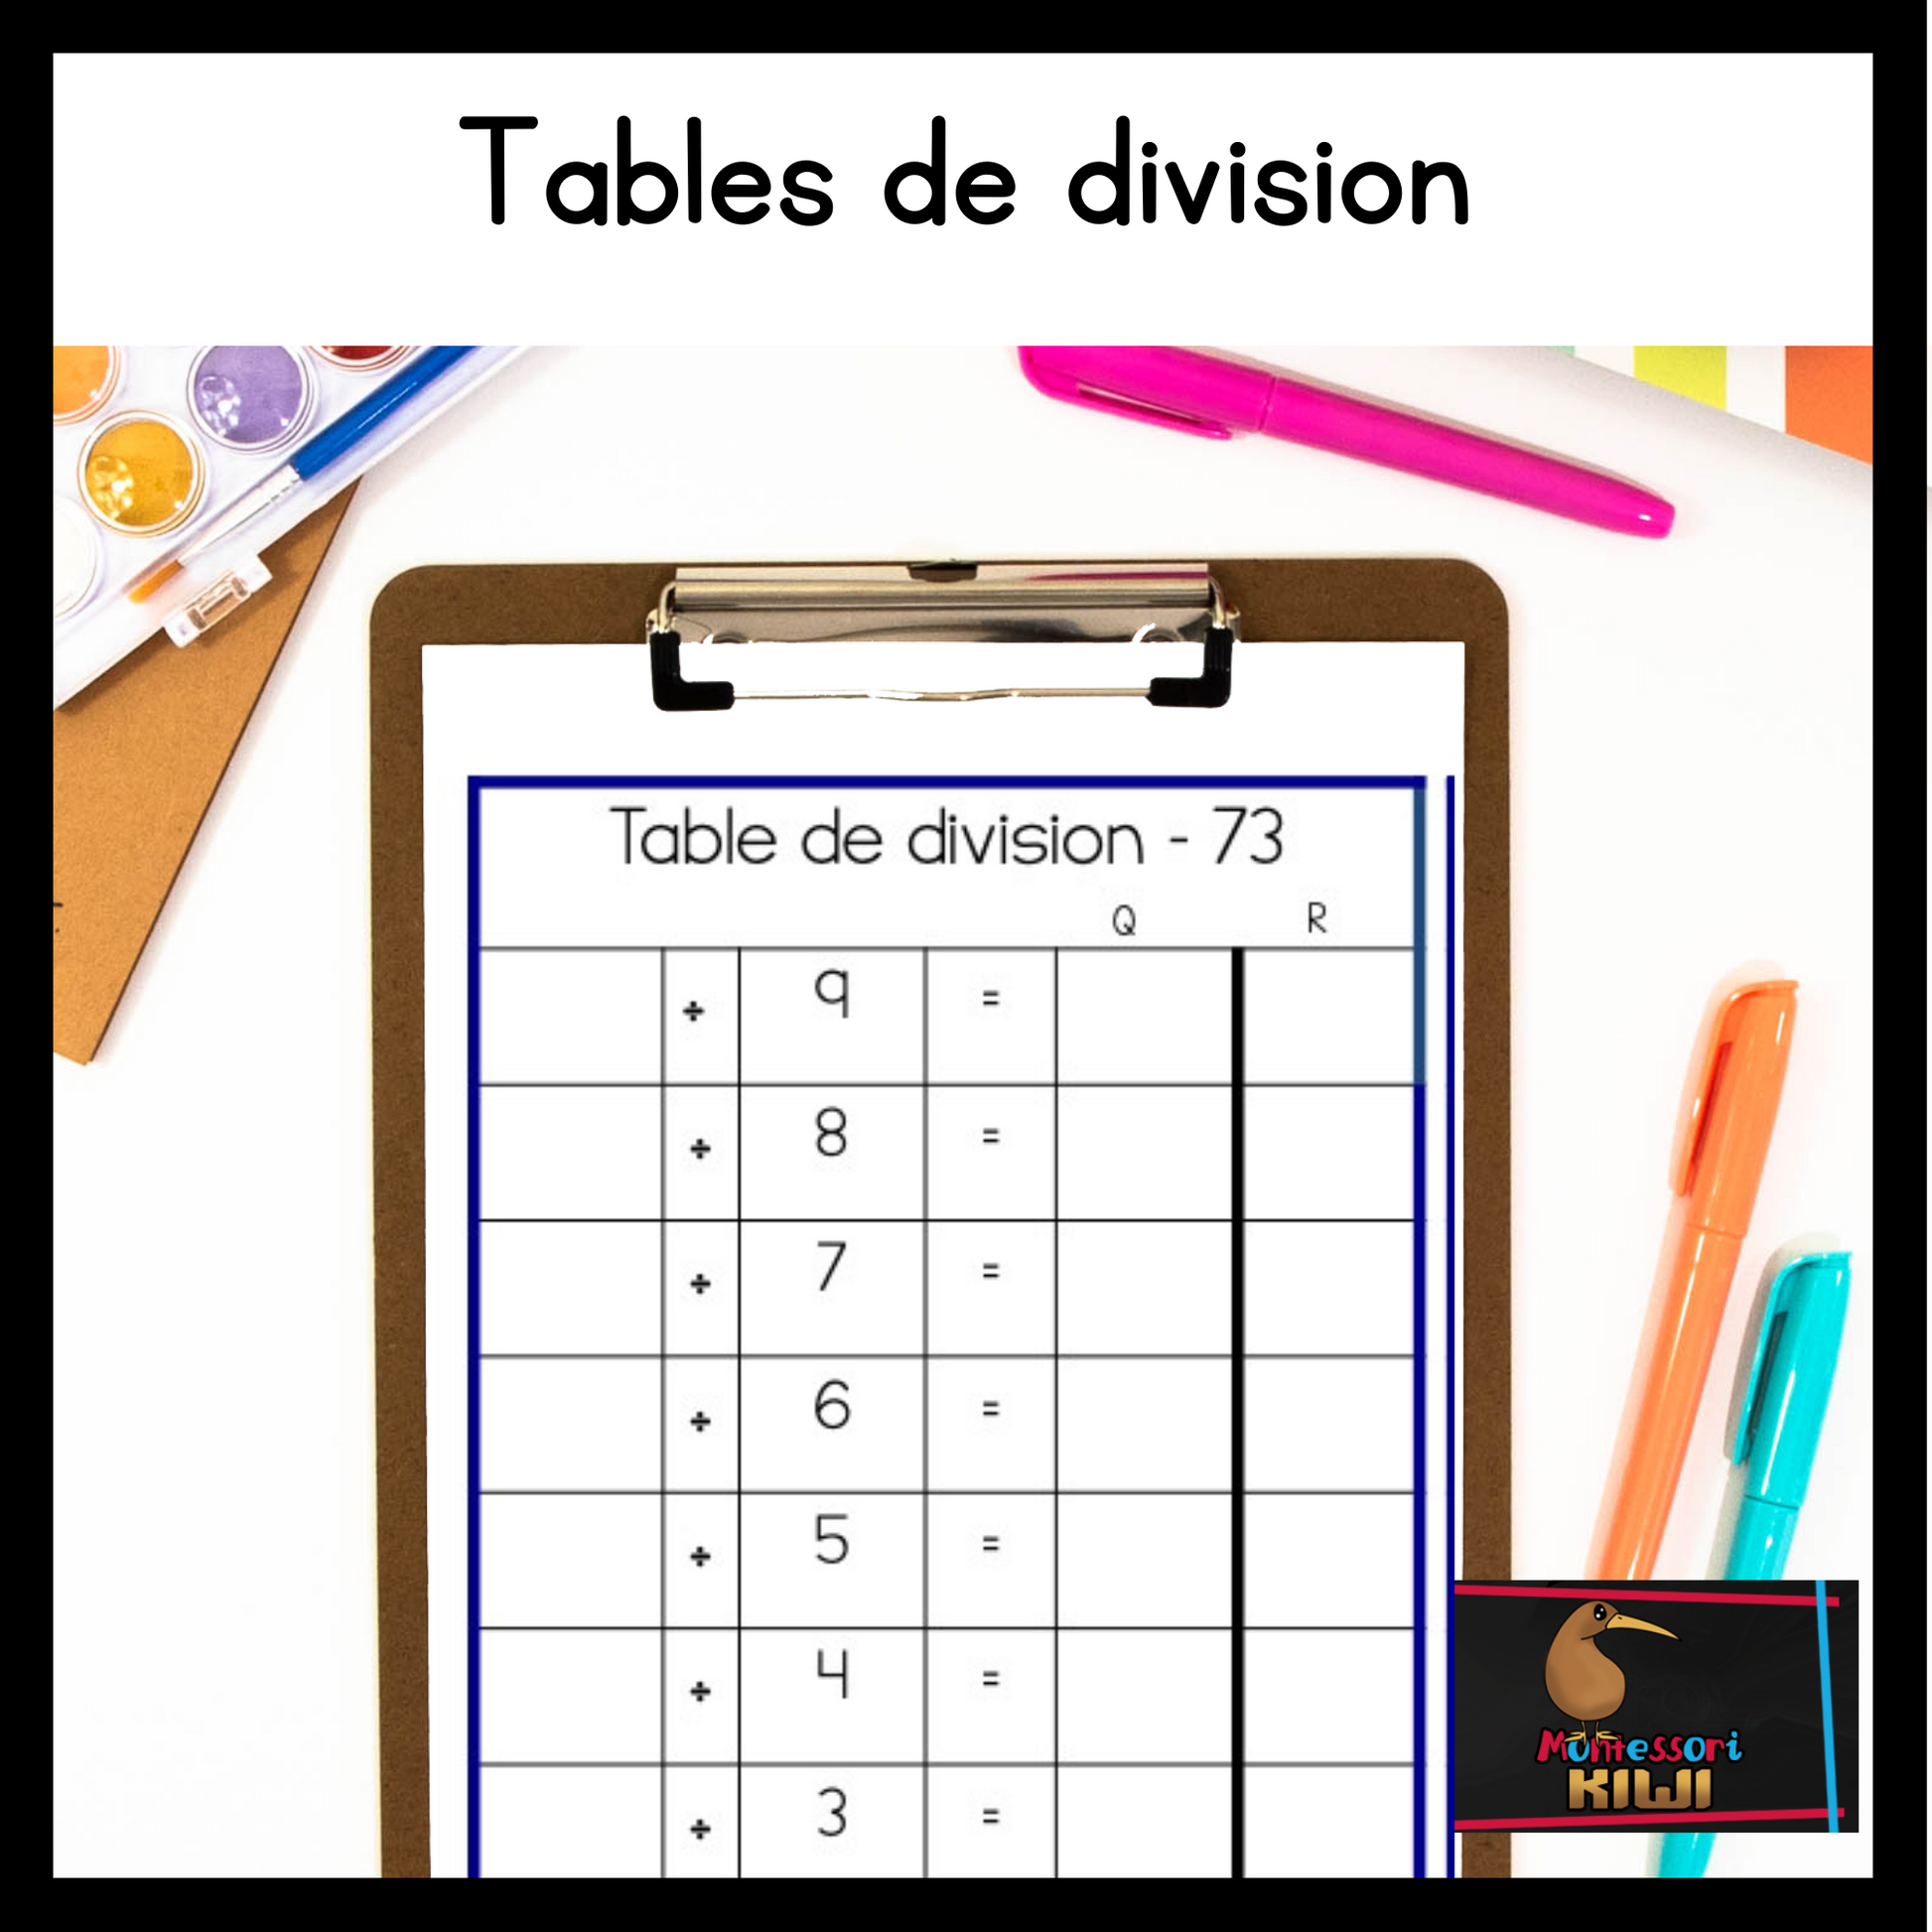 Tables de division (division chart tables - french) - montessorikiwi